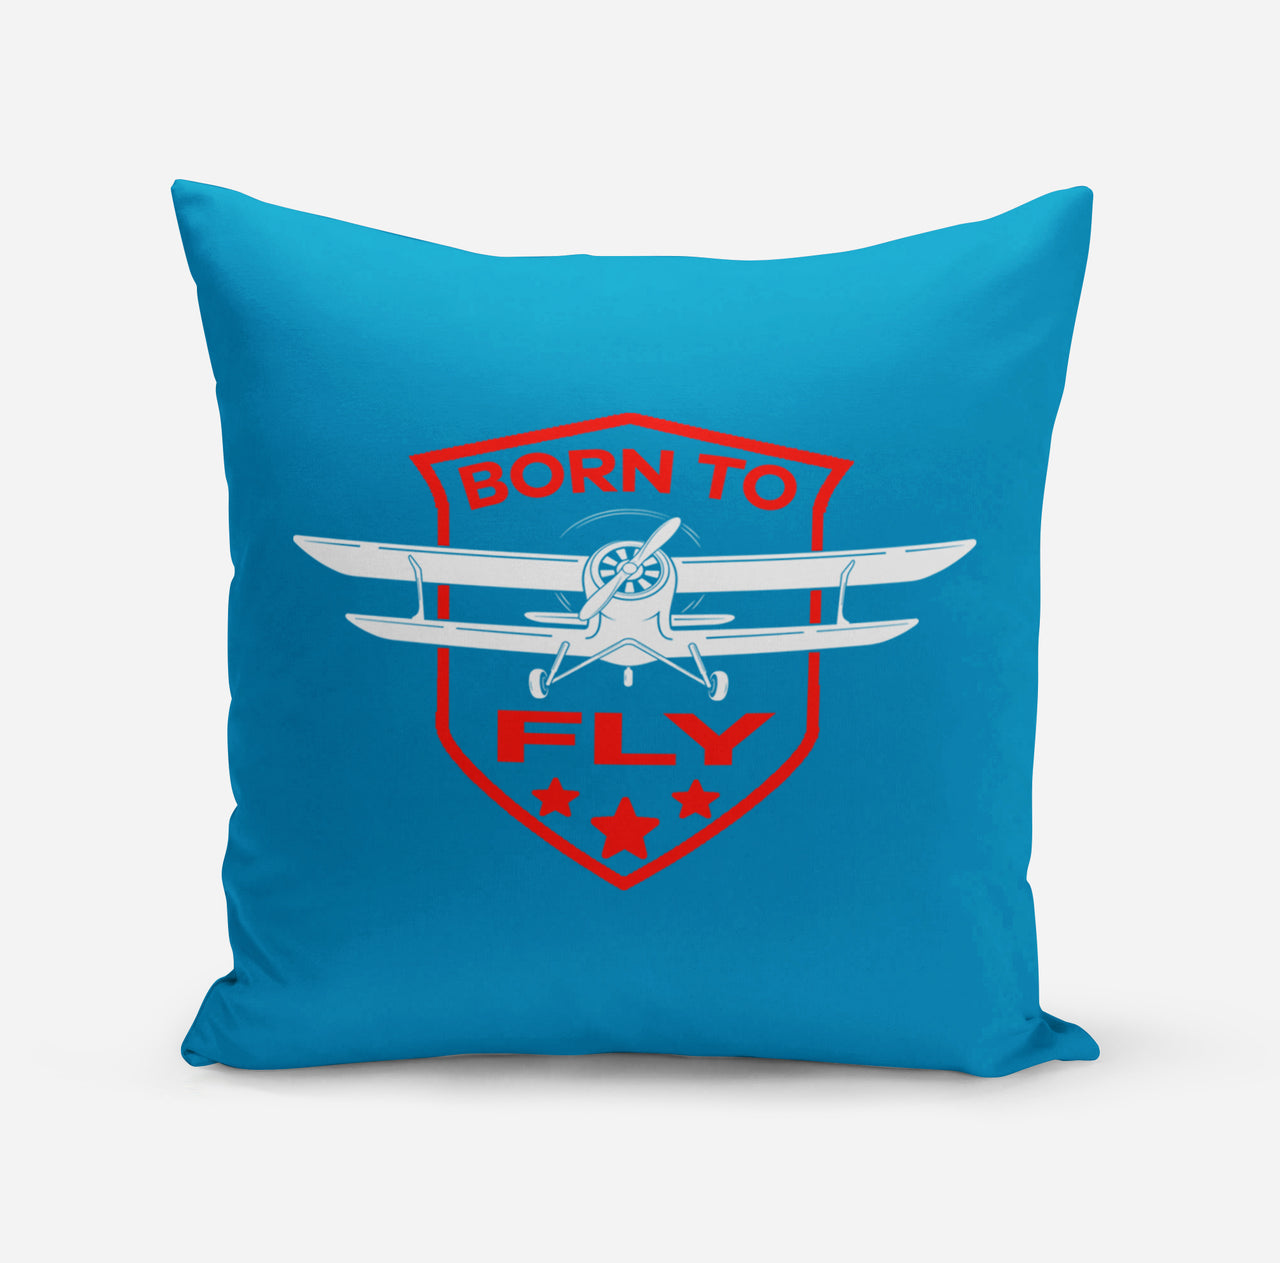 Born To Fly Designed Pillows